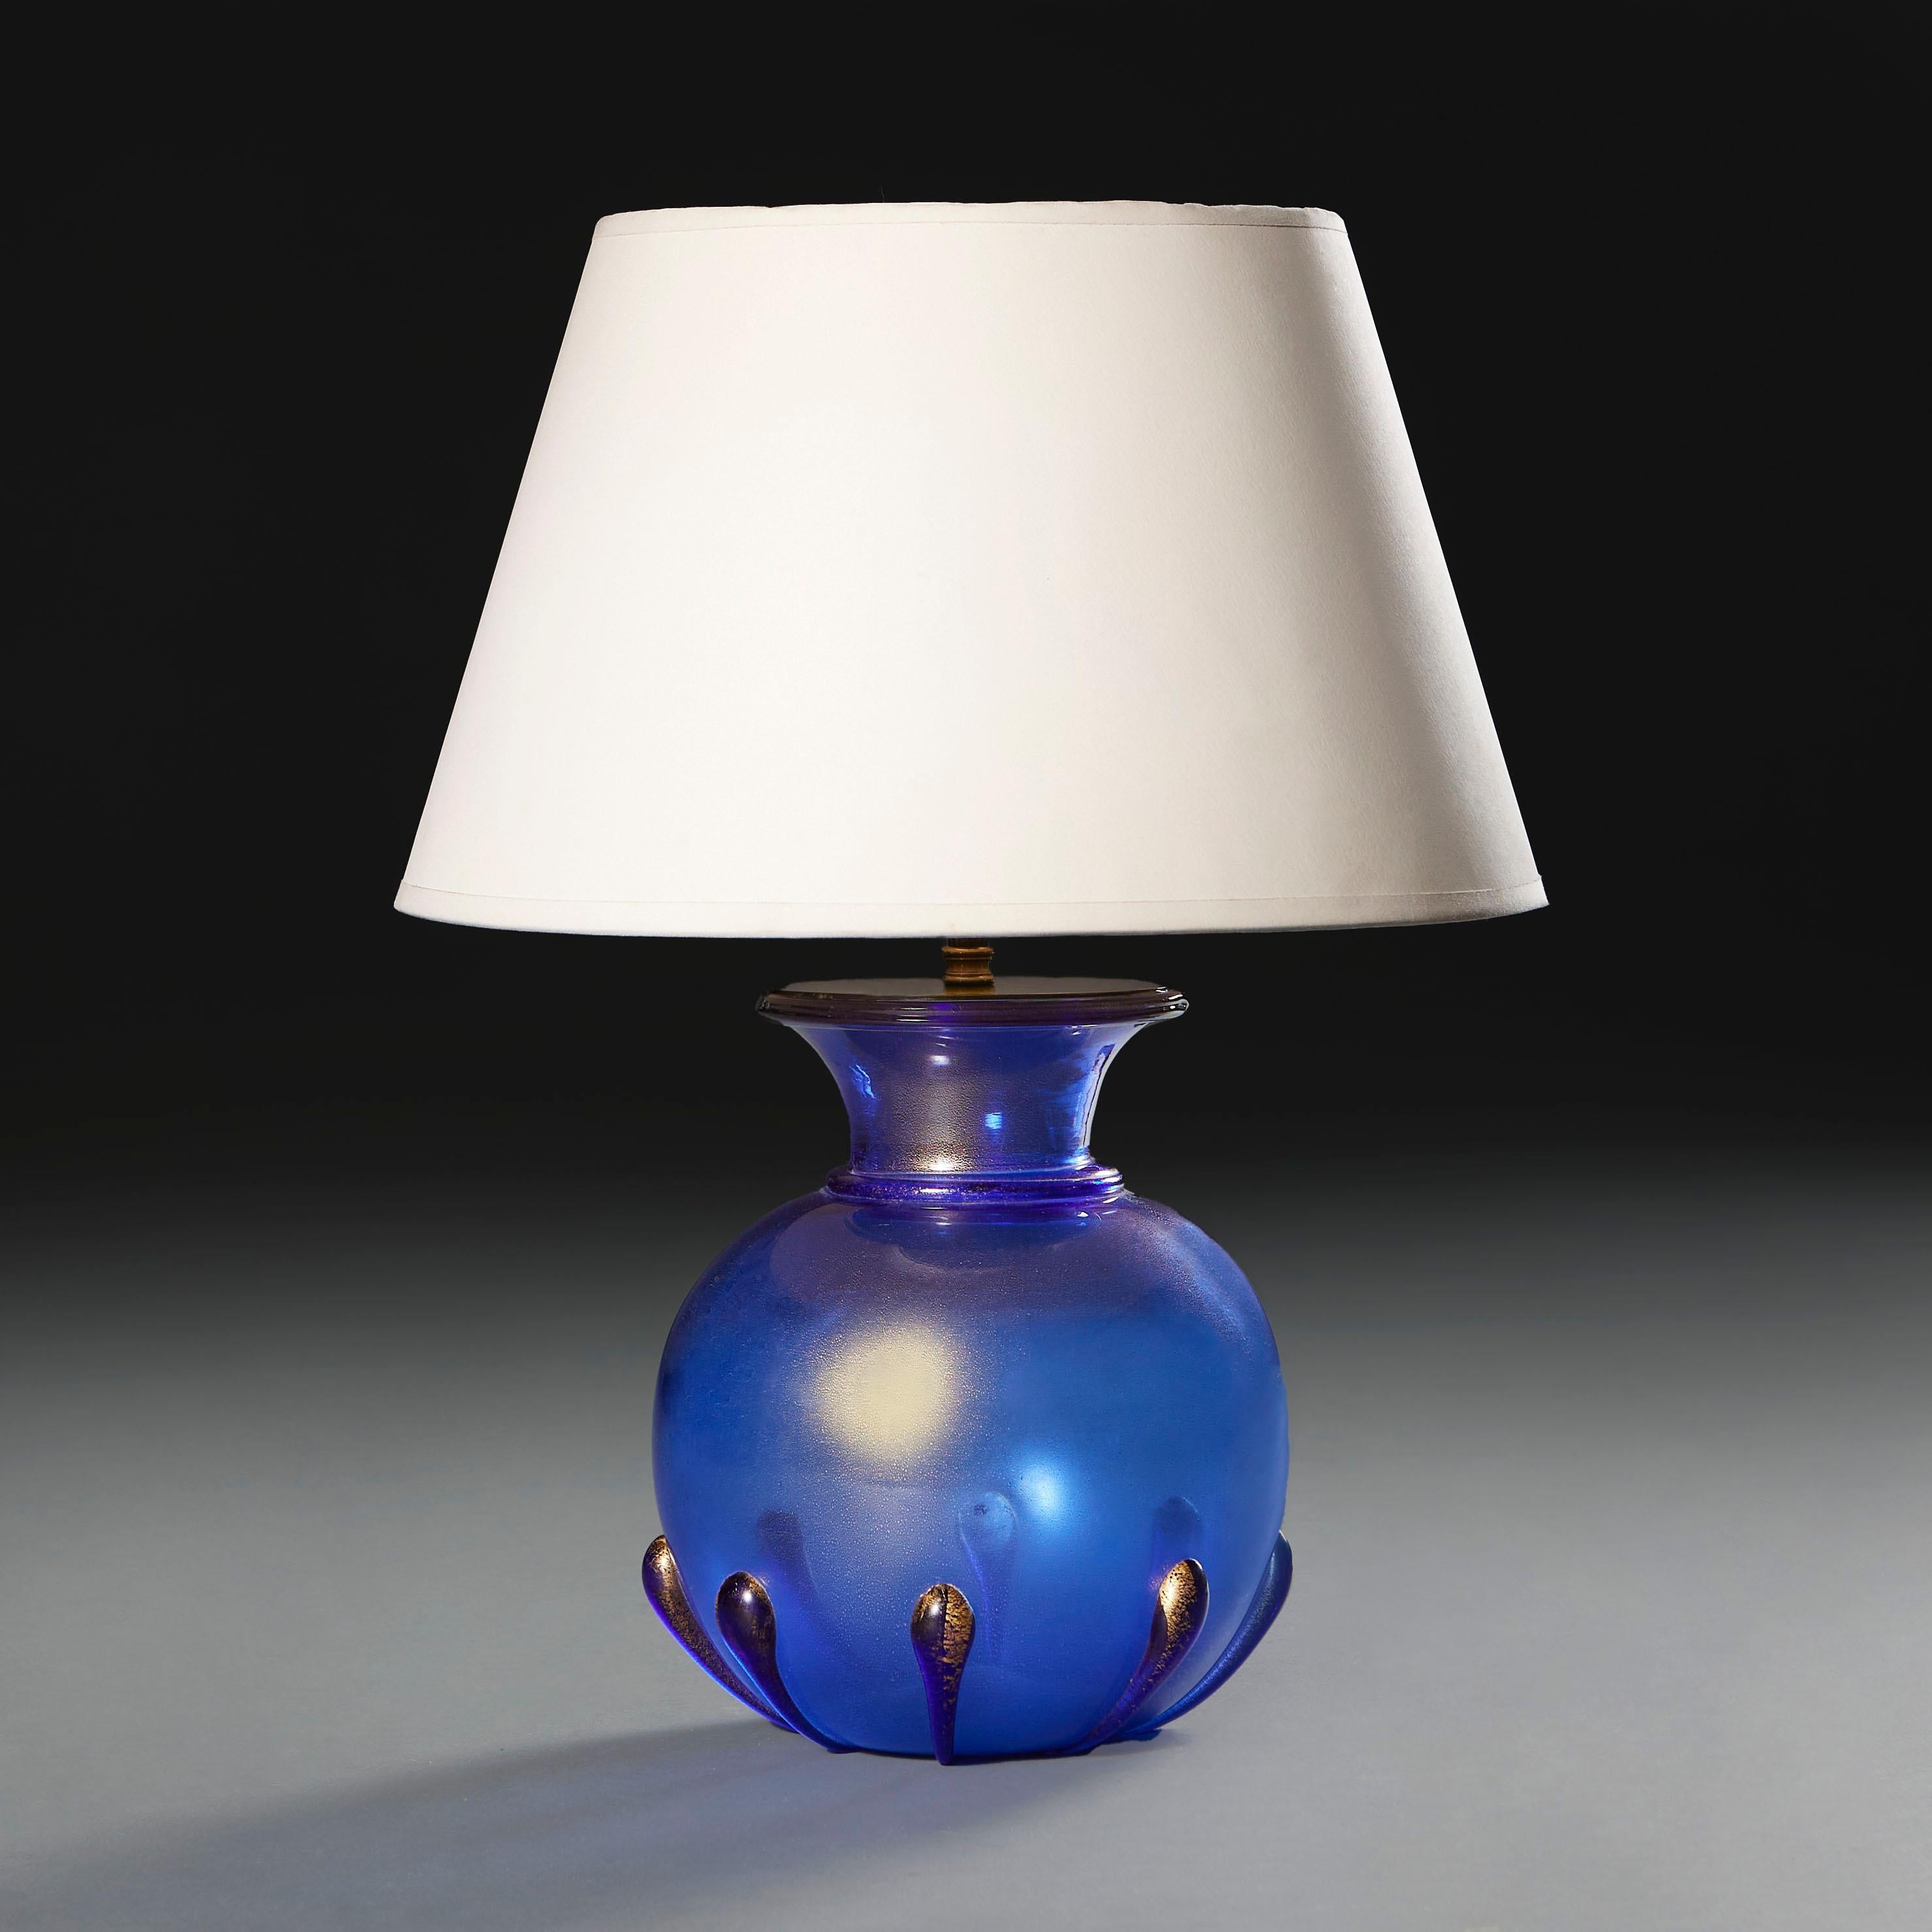 Italy, circa 1940

A mid twentieth century blue Murano glass vase with gold flecks throughout, with flared neck and drips to the base, now mounted as a lamp.

Photographed with 14” diameter pale cream card Pembroke lampshade.

Currently wired for